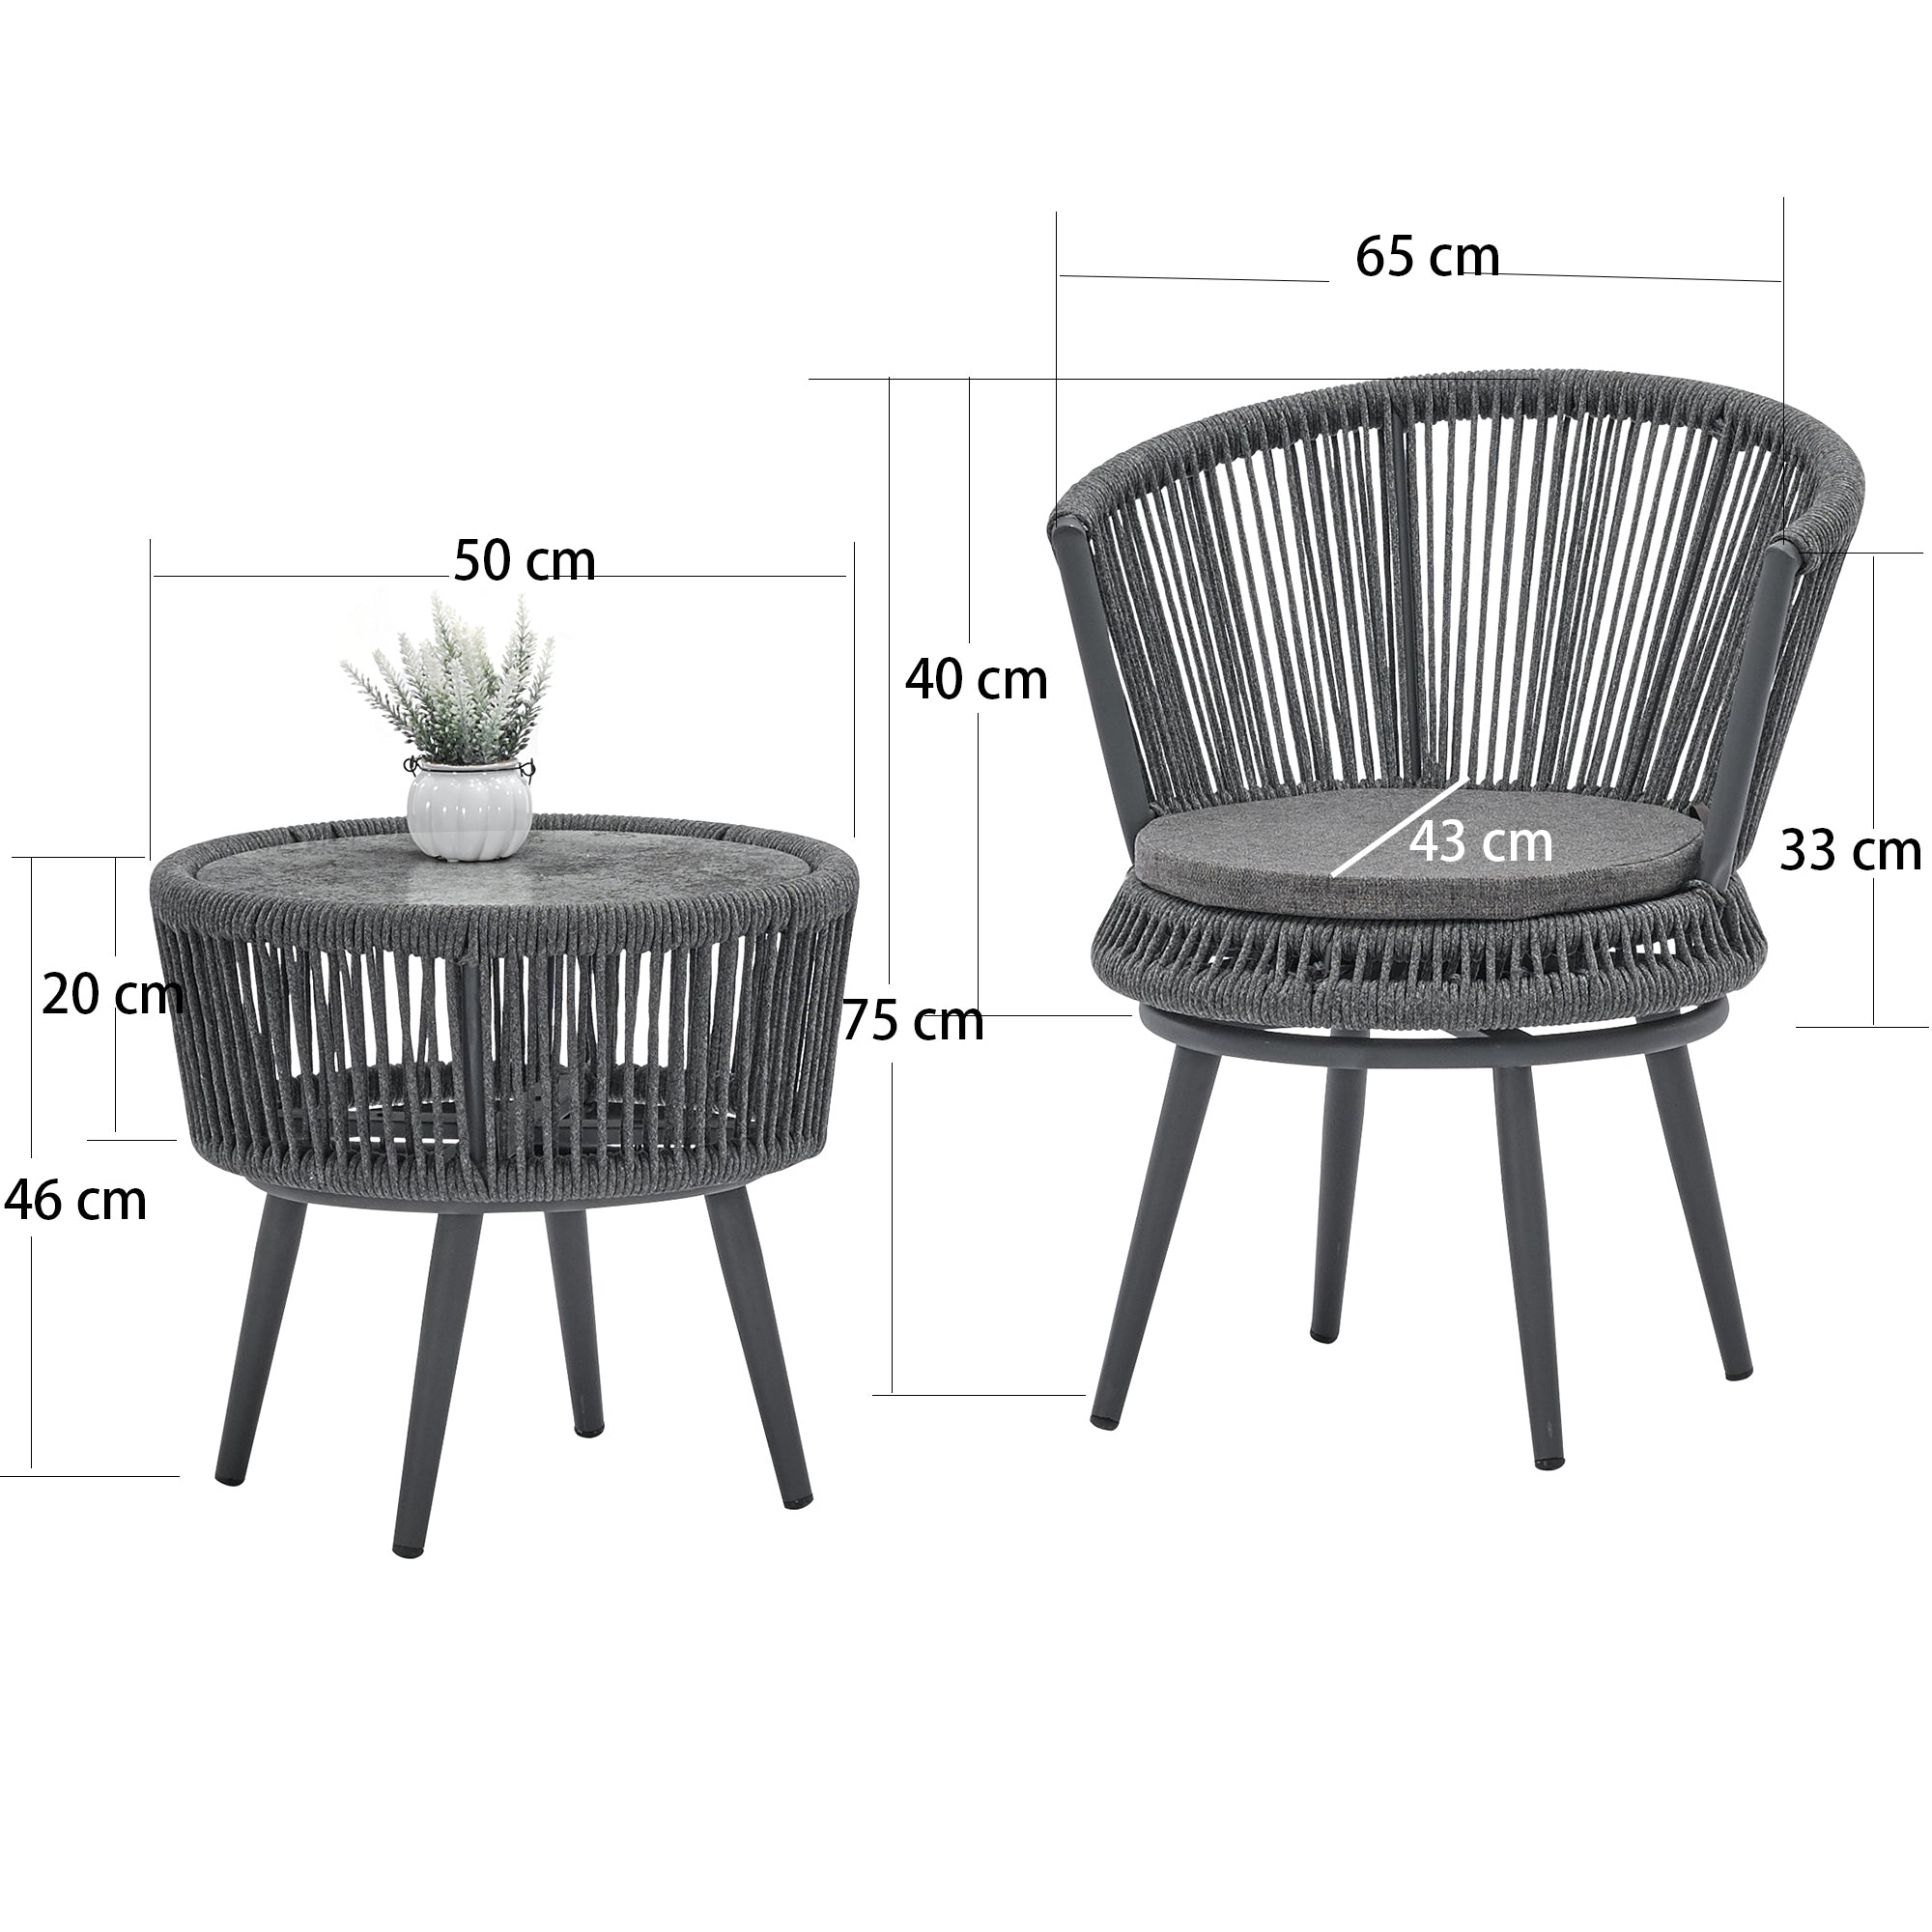 outdoor Swivel Rope Chair 3PCS Rattan Chair woven-belt rope